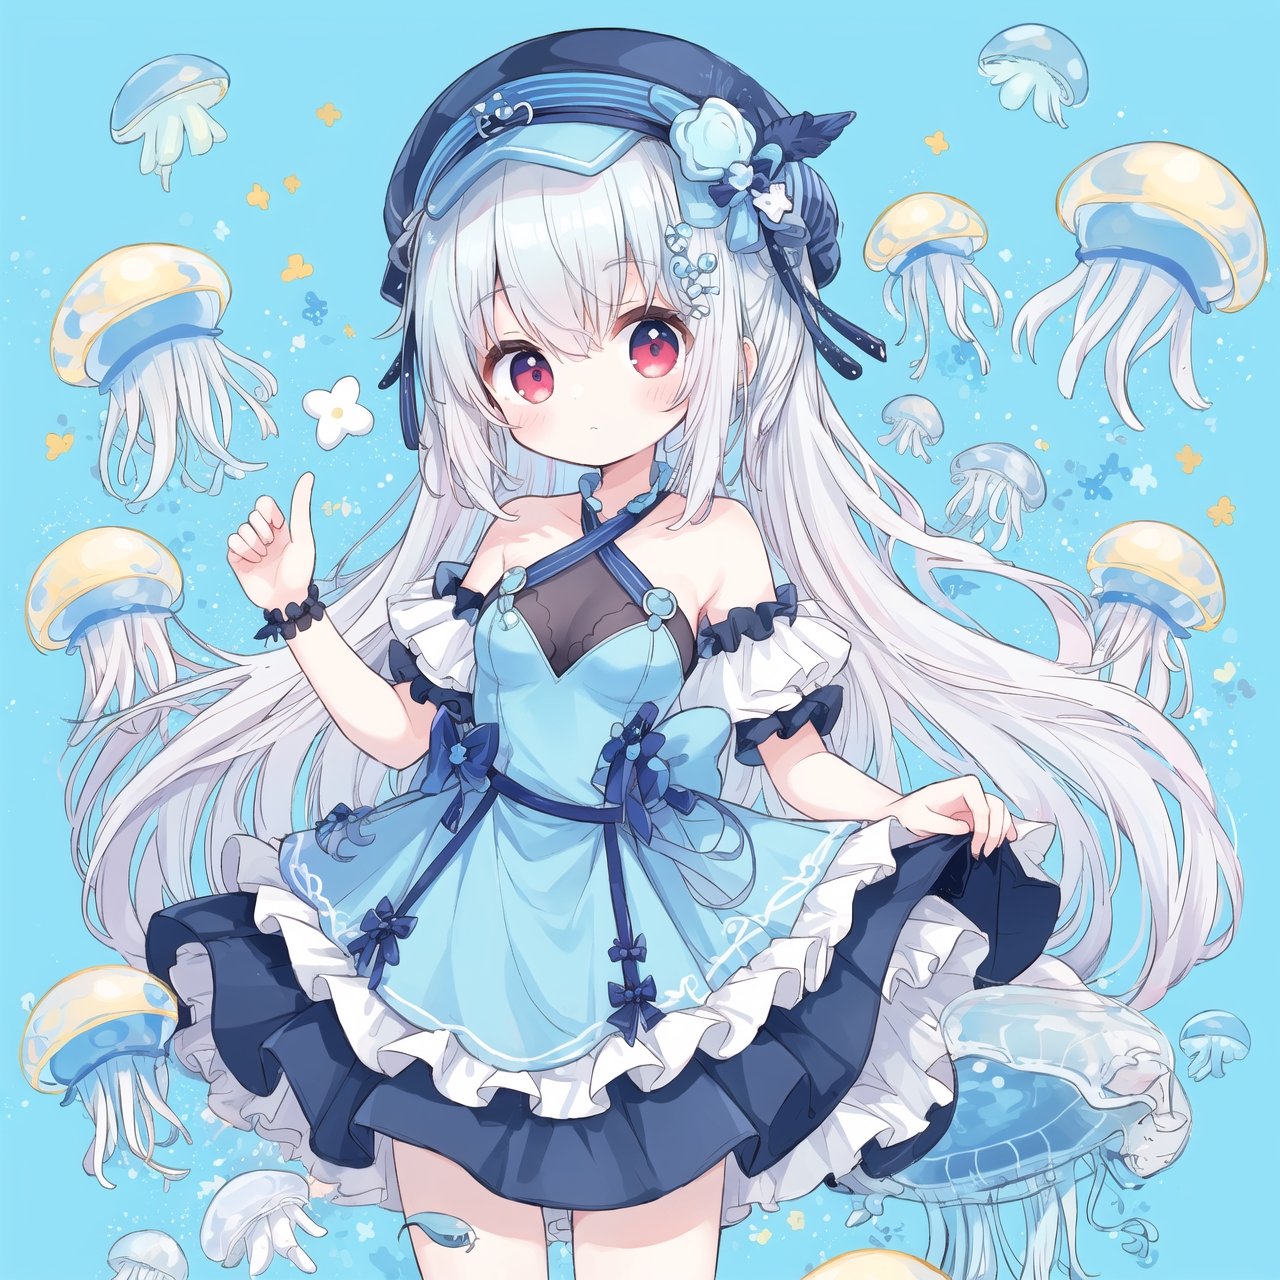 (masterpiece), (best quality), ,thin, ((small breasts)), (tiny breasts), tiny, 1 girl, solo, long hair, messy hair, blue and white hair, (Jellyfish over the head) , (Jellyfish) ,((Jellyfish hat)), cyan_blue, red eyes, halter dress, (Floating), ,cute